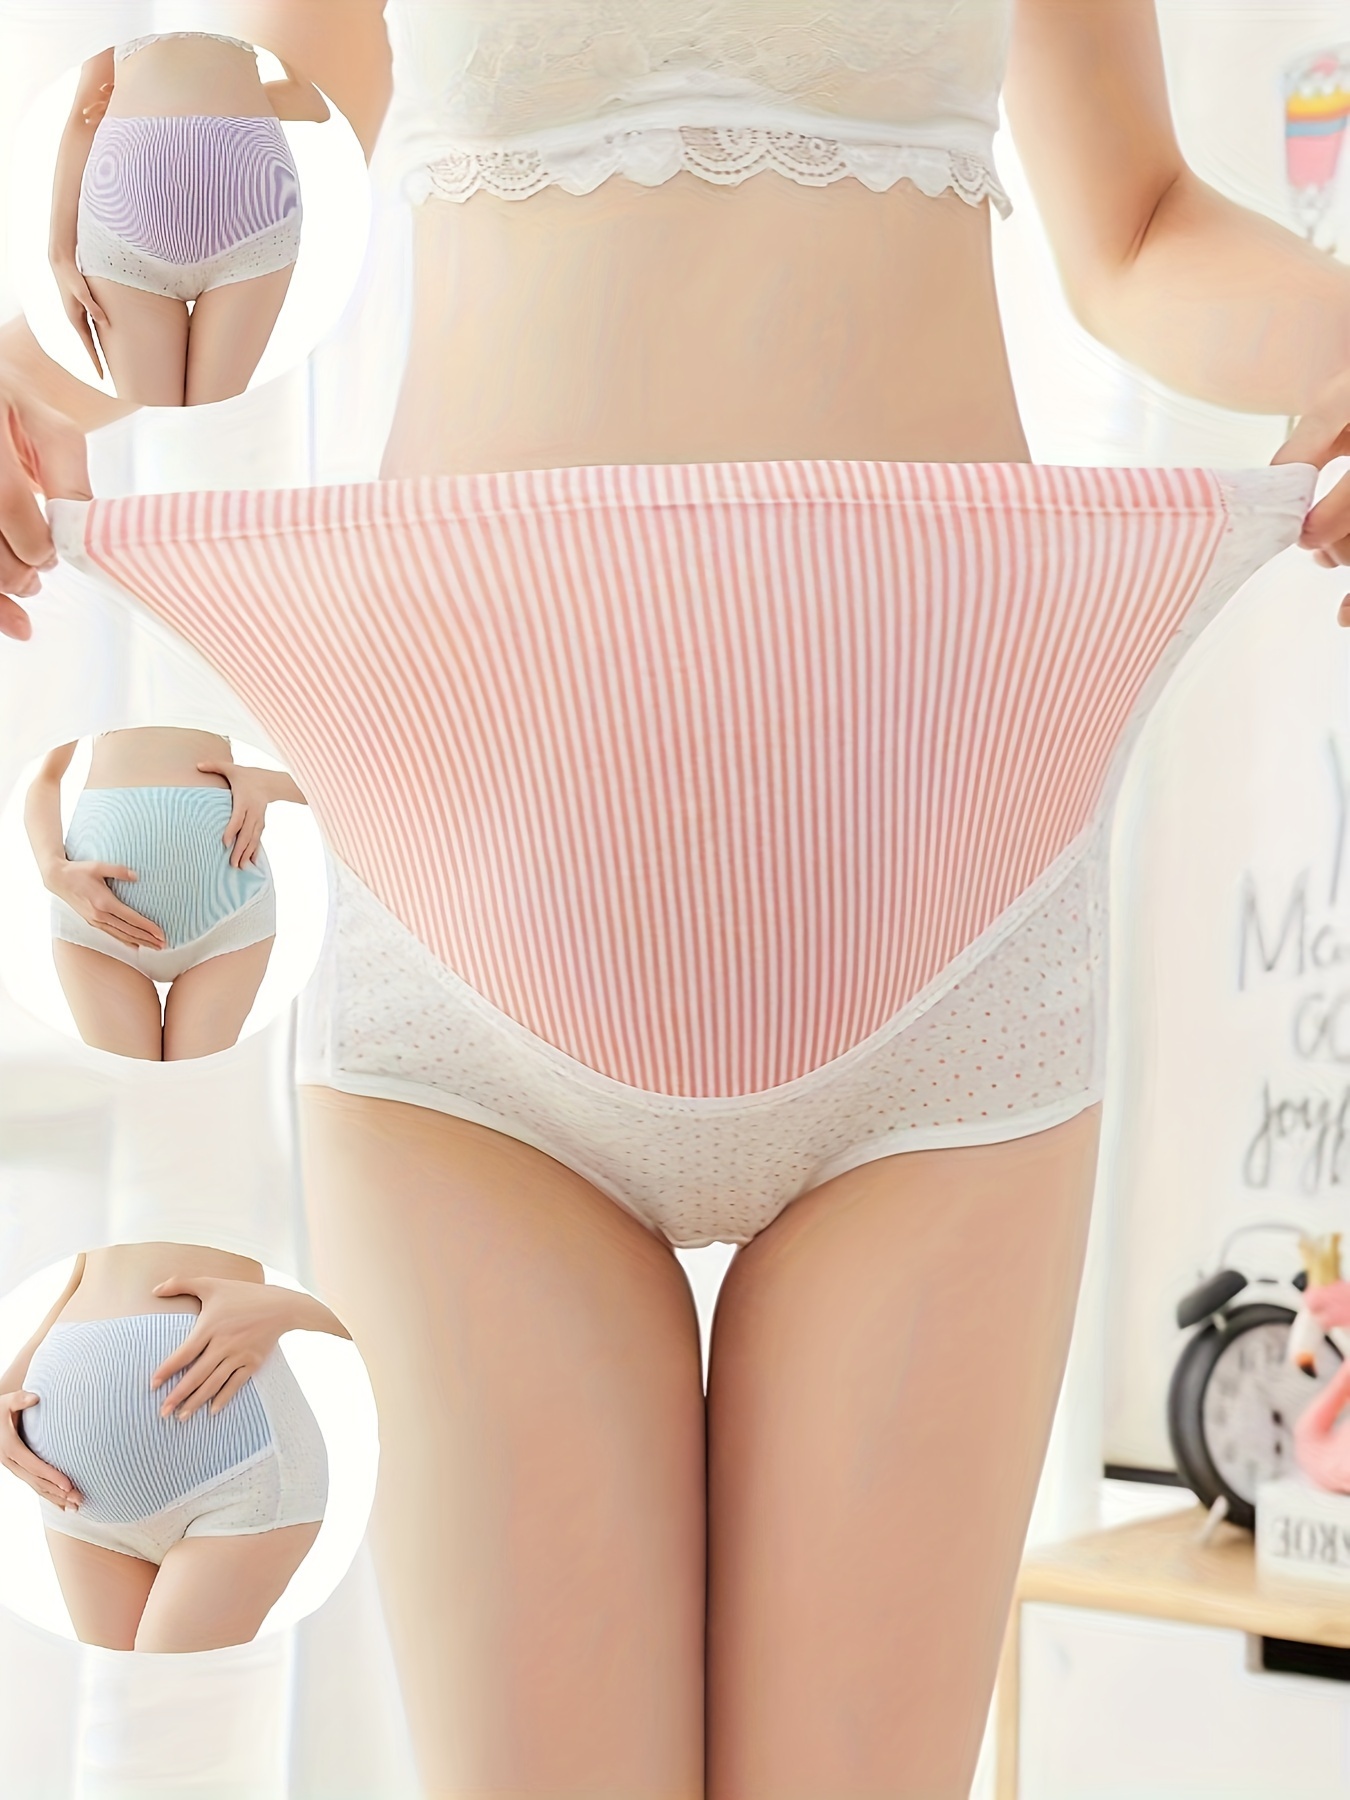 3pcs/set Simple Menstrual Panty, Comfortable Mid-waist Physiological Panties,  And Breathable Postpartum Brief